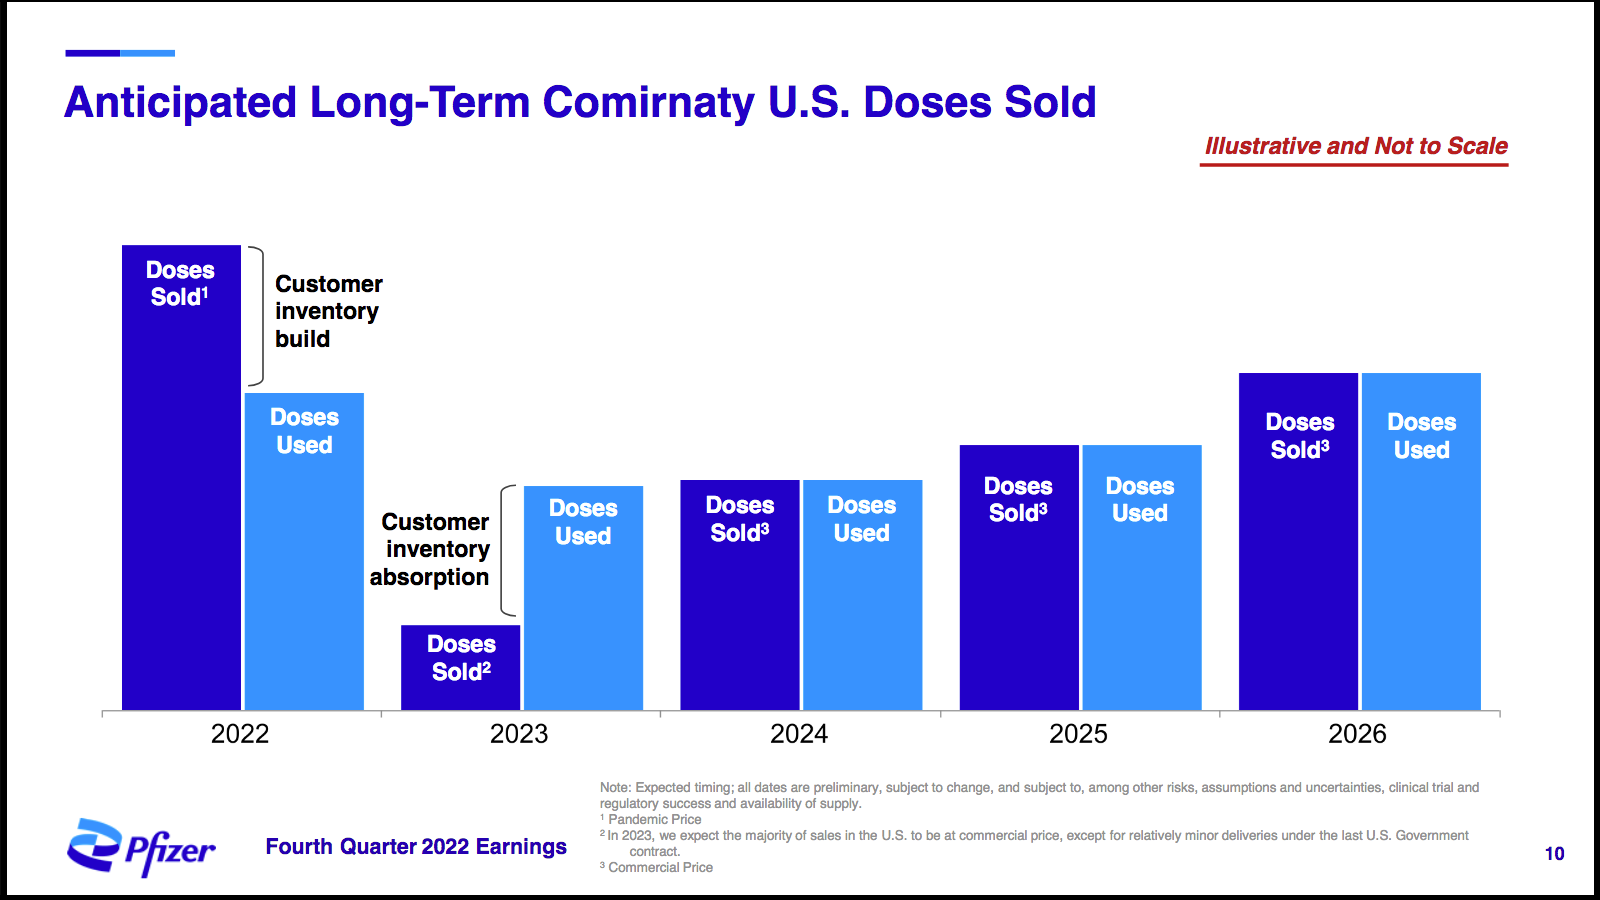 COVID Leads Pfizer To Record $100B Revenues, But A Bleaker 2023